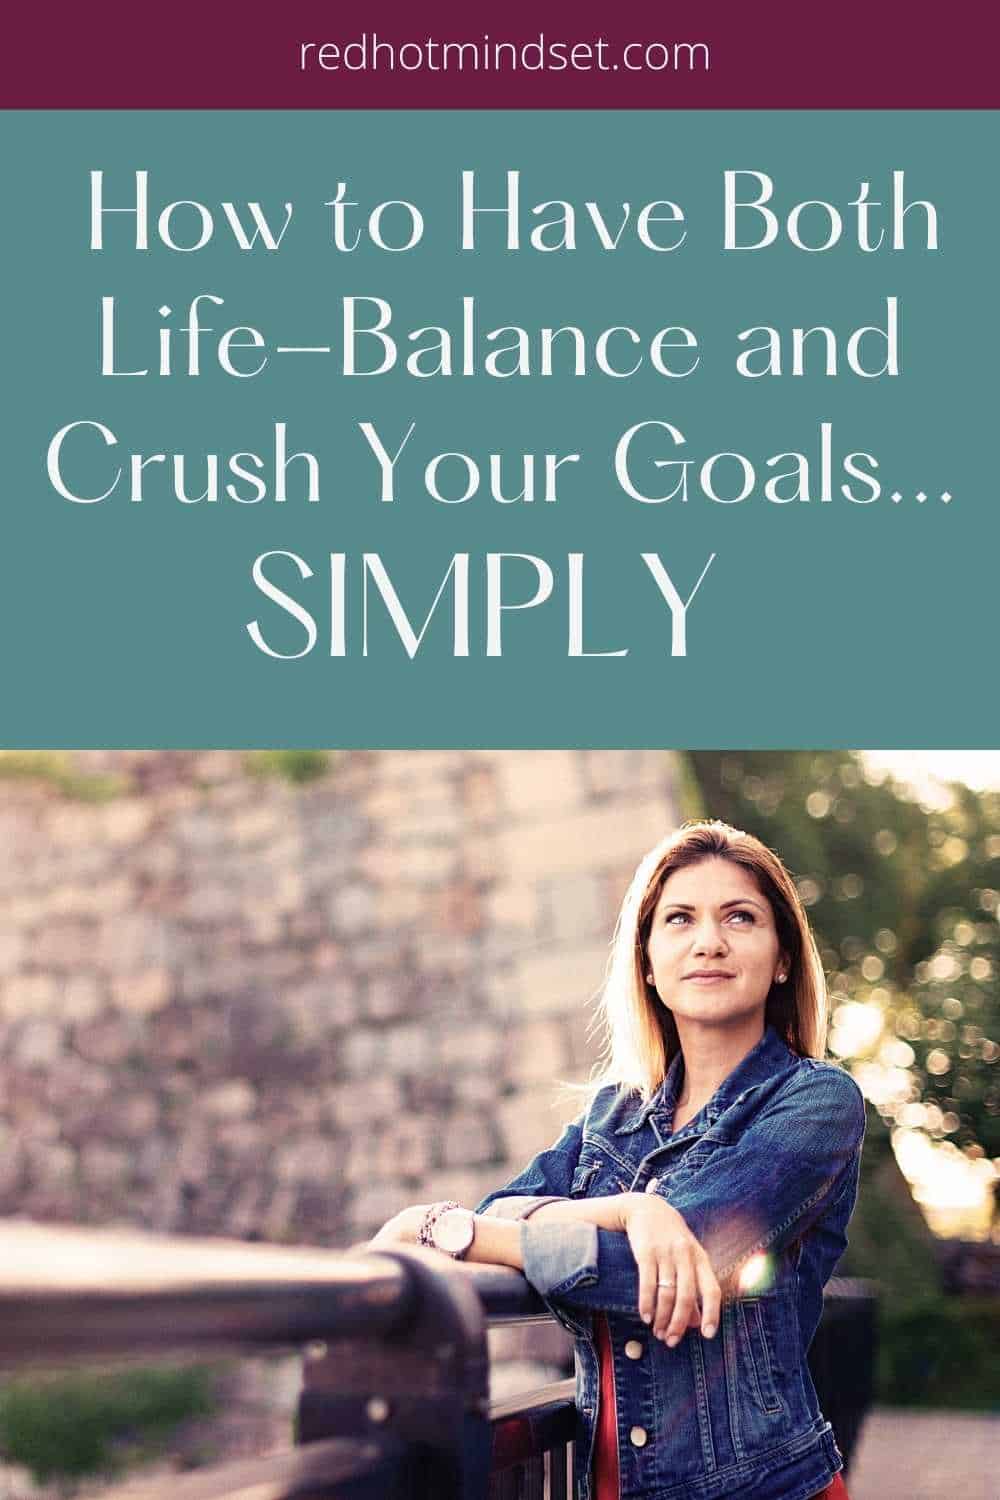 Ep 163 | Why Simplifying Isn’t Enough… and How to Create an Intentional Plan that You’ll Stick to that Combines Both Life Balance and Goal Crushing